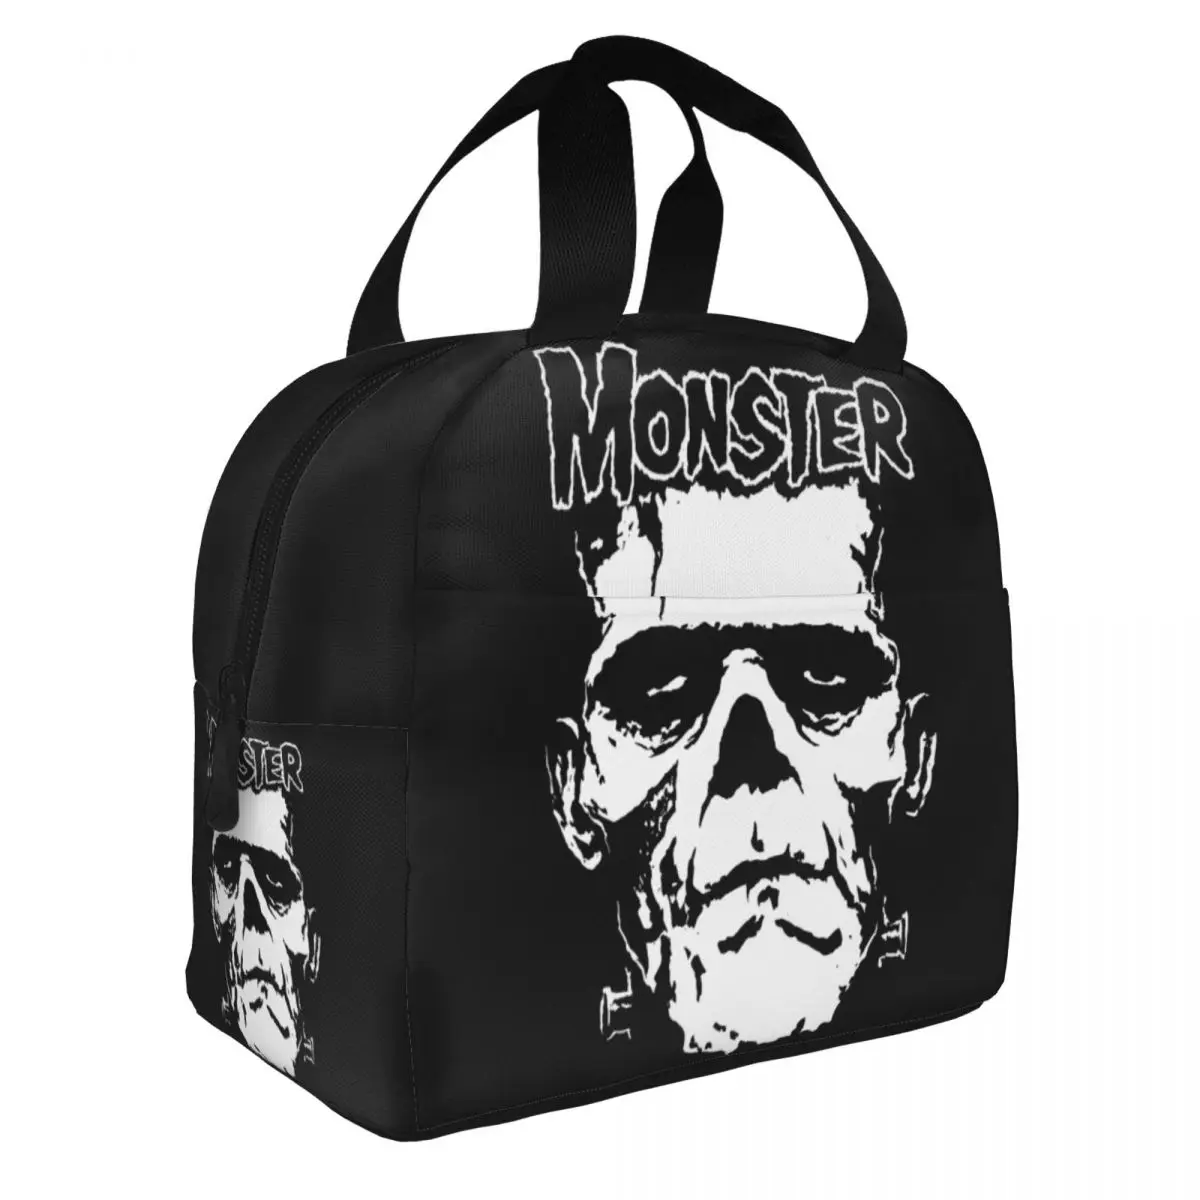 

The Monster Skull Insulated Lunch Bag Leakproof Frankenstein Horror Movie Meal Container Cooler Bag Lunch Box Tote Beach Outdoor